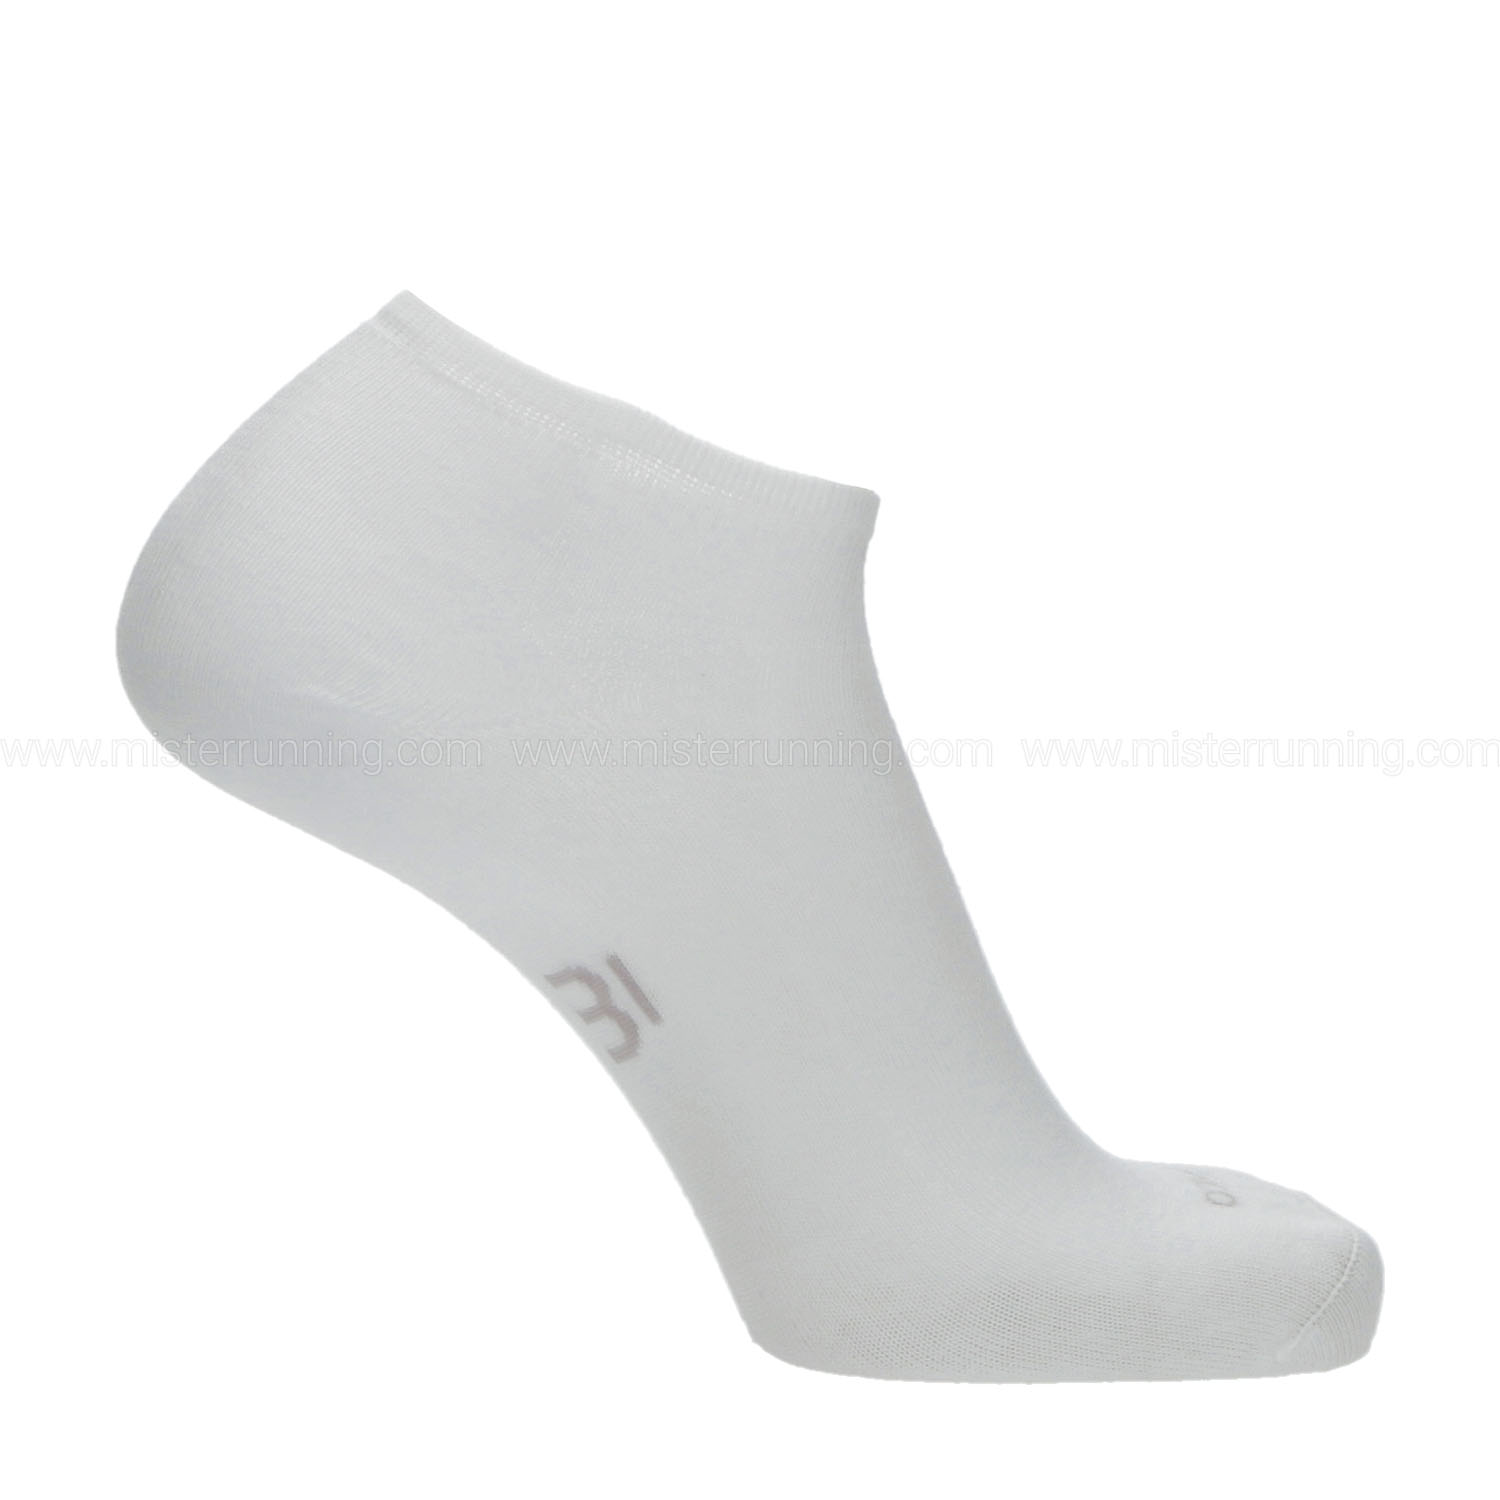 Mico Light Weight x 3 Calcetines - Bianco